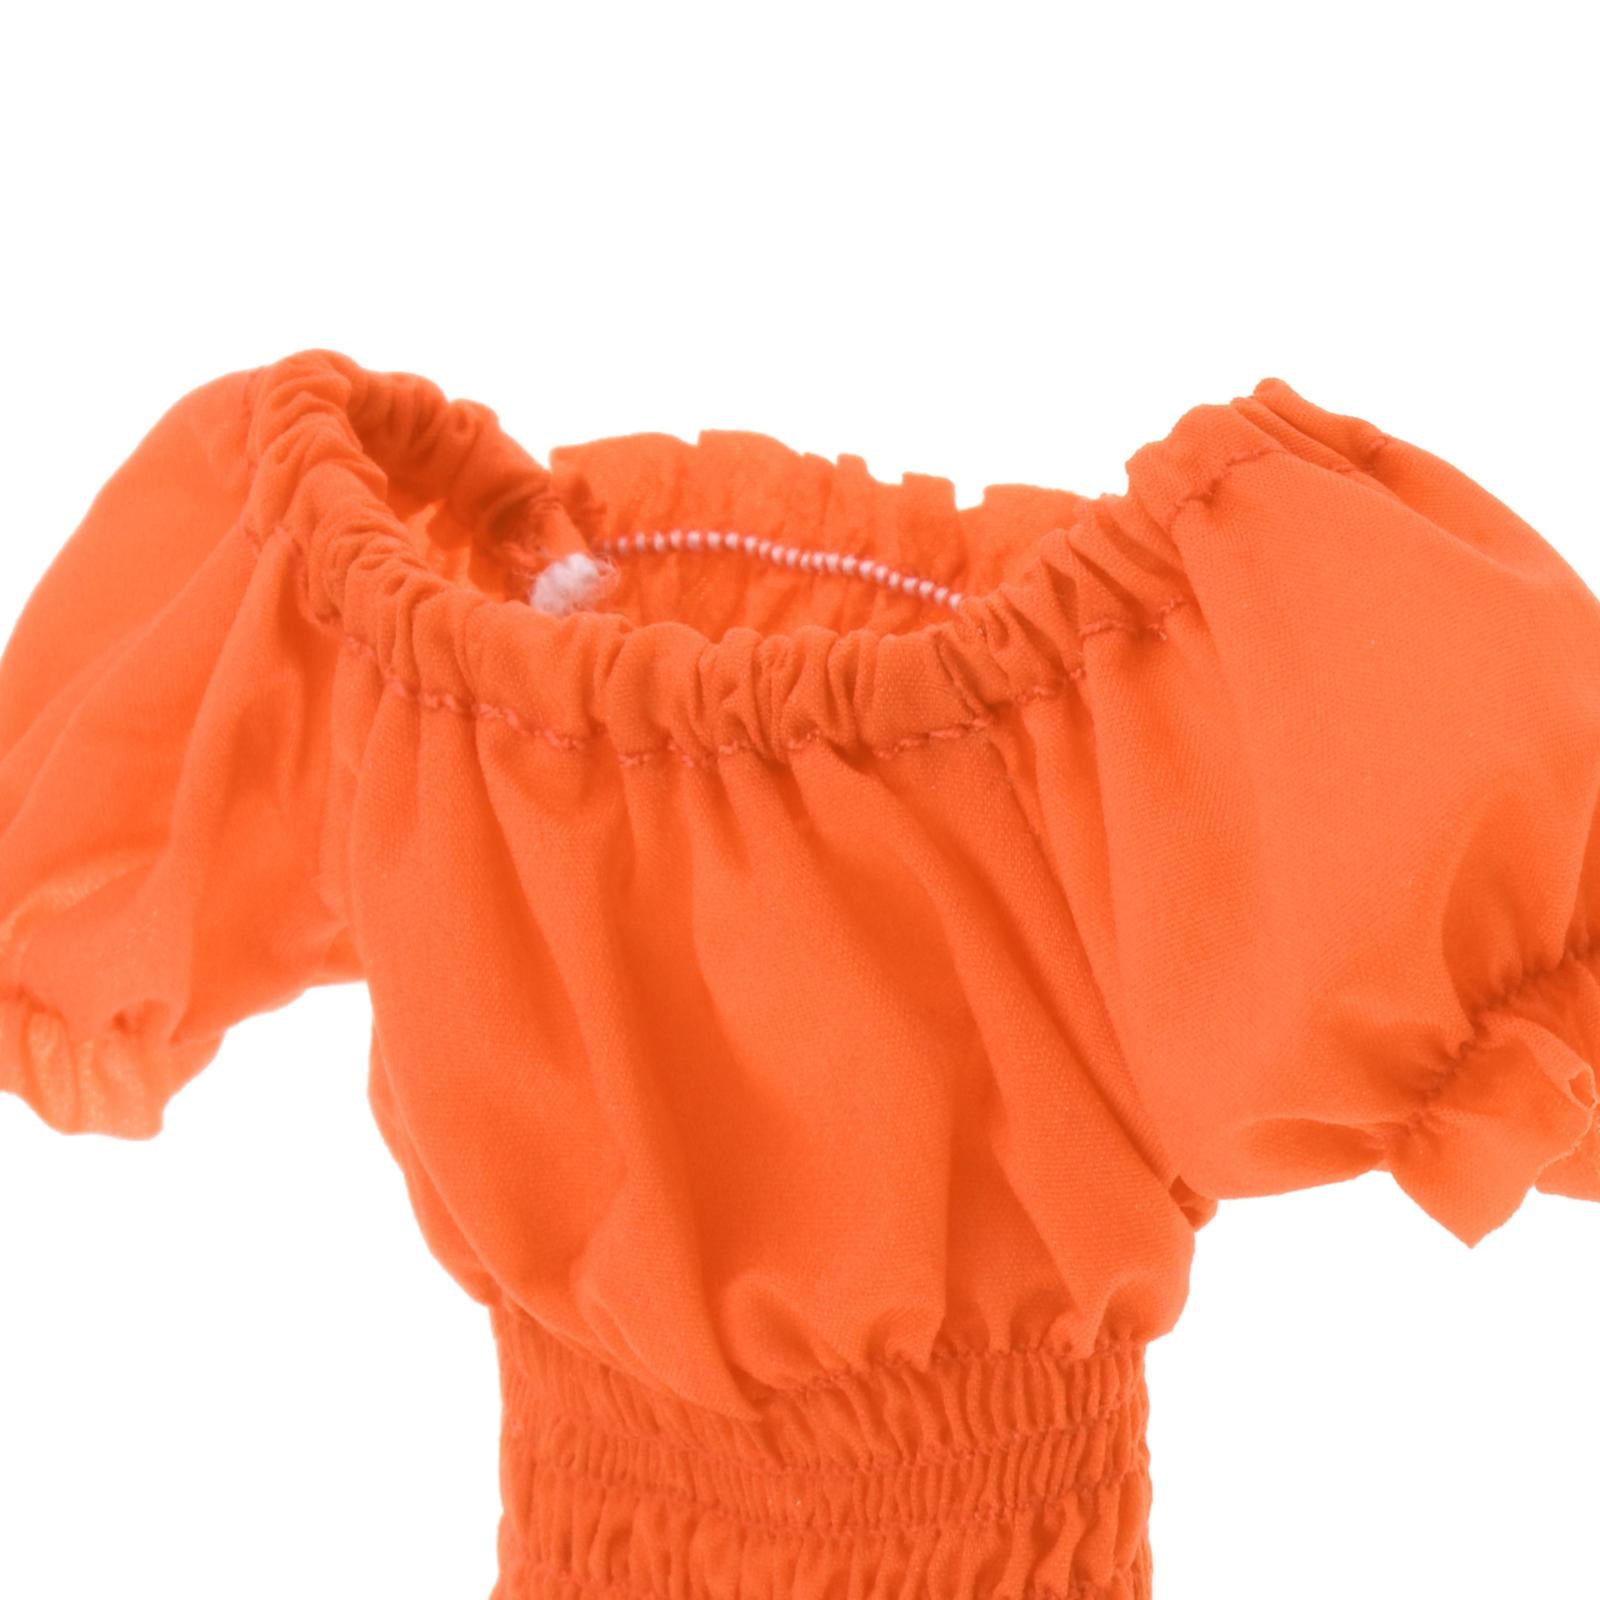 1/6 Female Clothes Puff Sleeve Top T-shirt Fit 12'' Action Figure Orange F